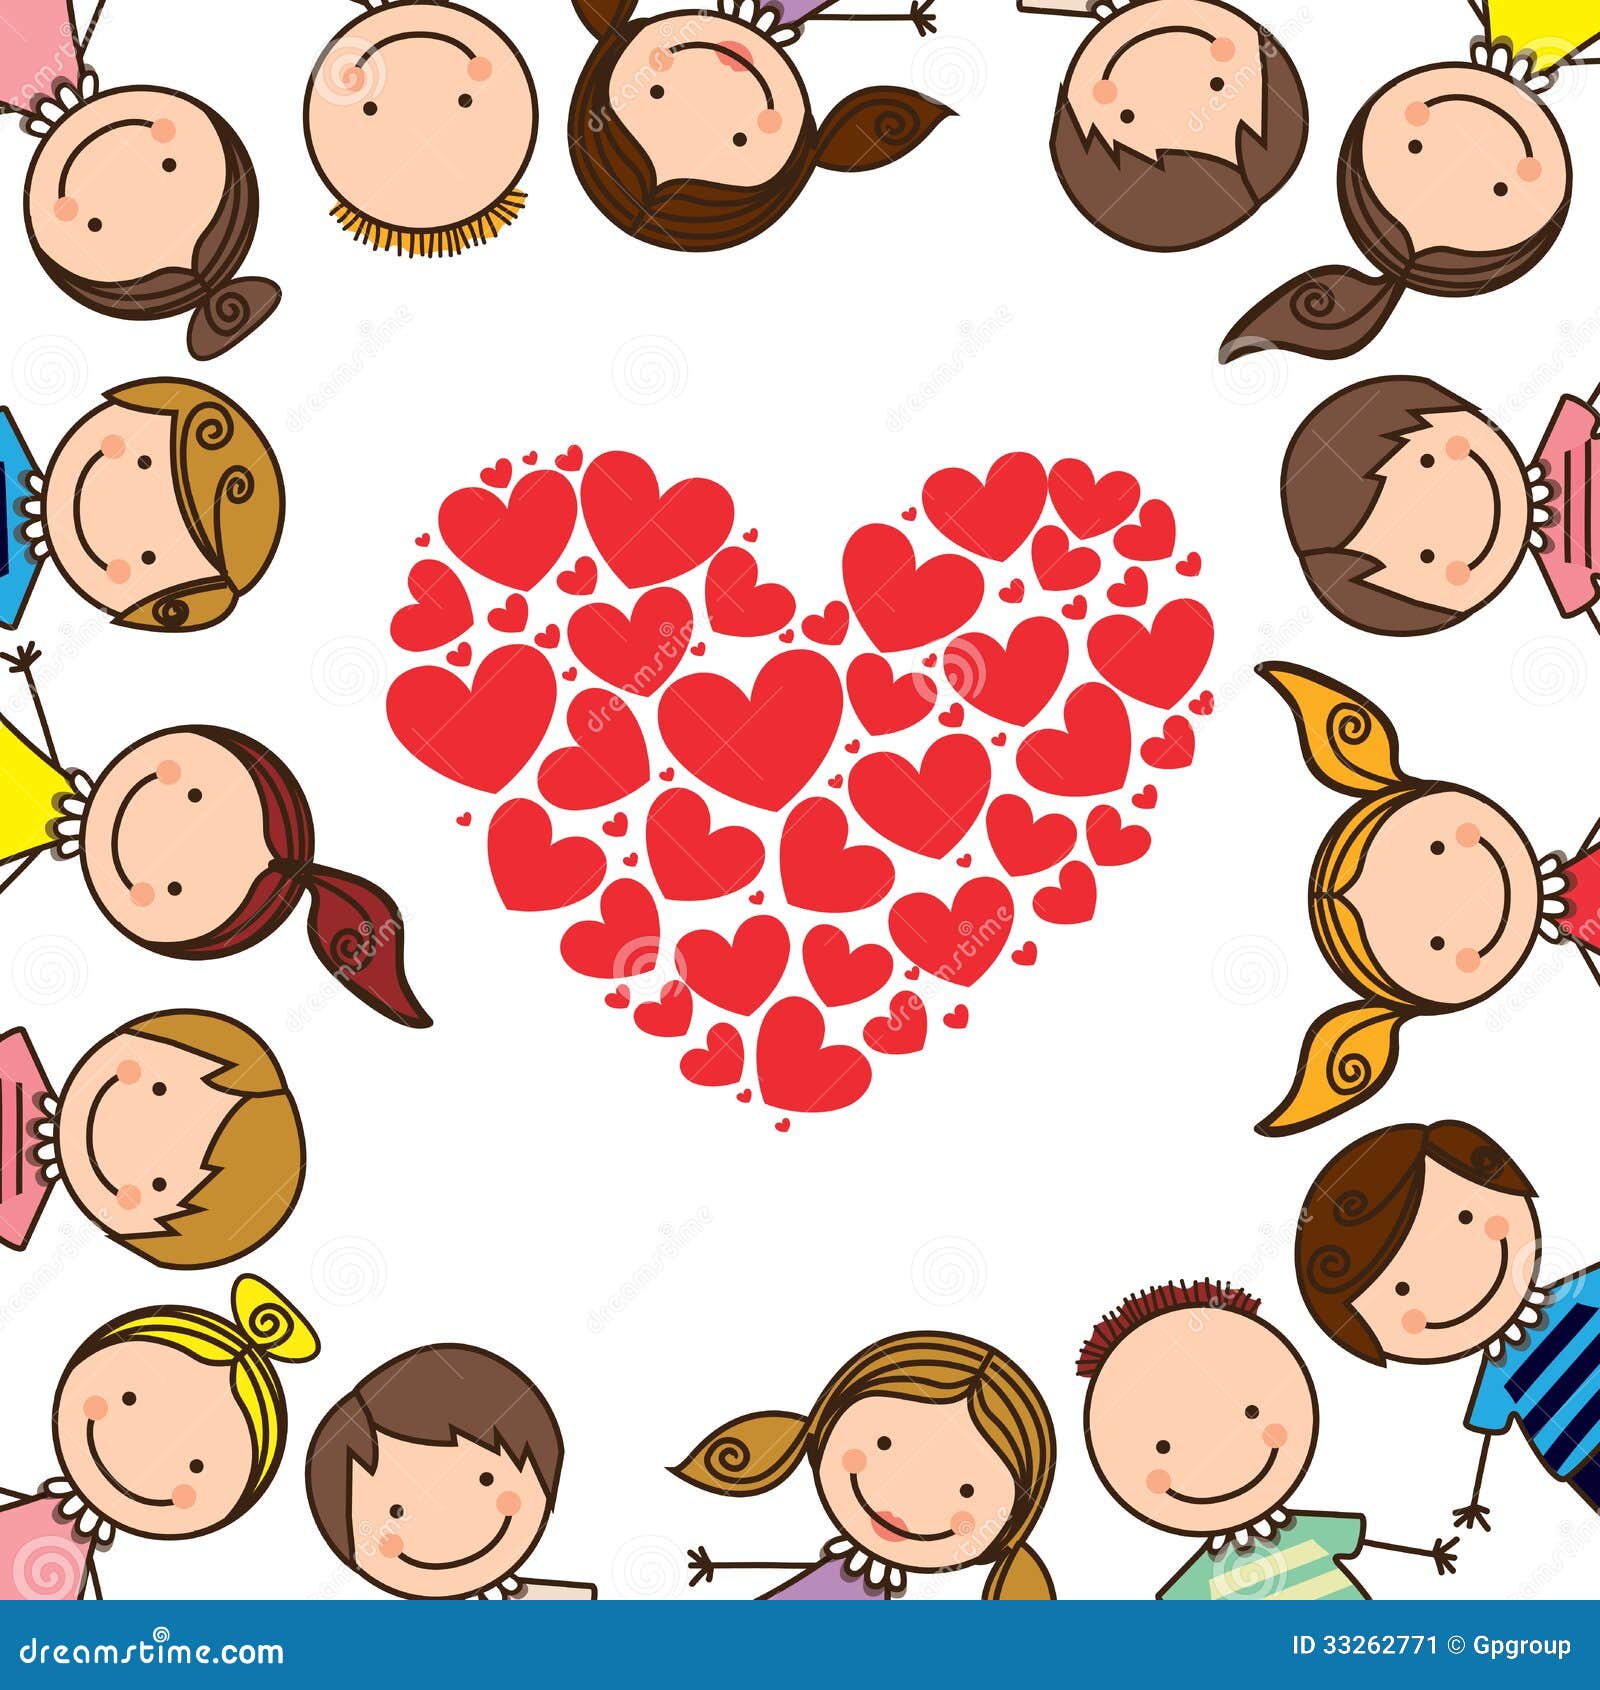 love clipart background - photo #28